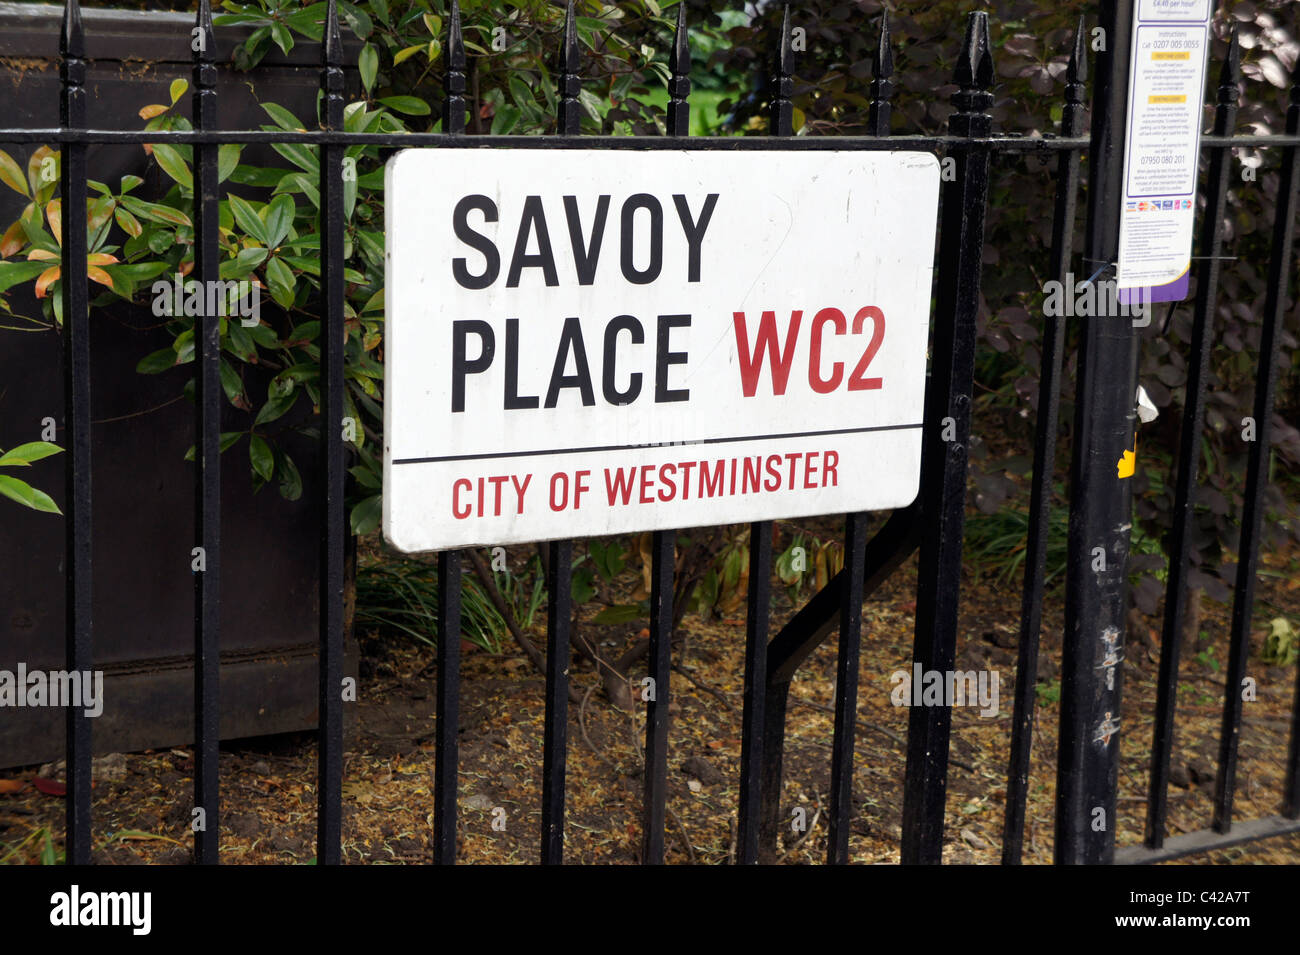 Savoy Place WC2 City of Westminster road sign Stock Photo